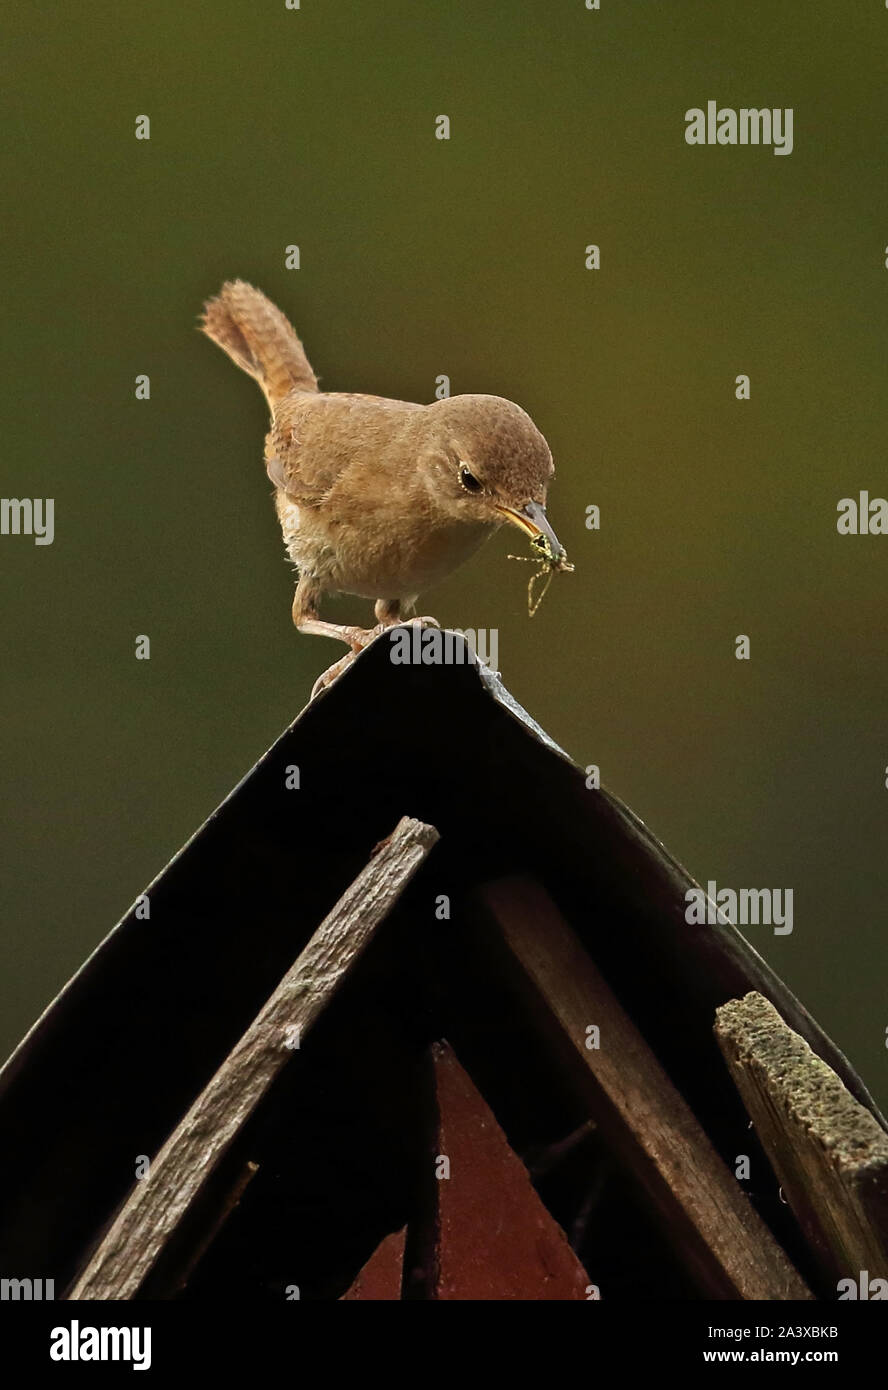 Southern House Wren (Troglodytes aedon chilensis) adult perched on roof approaching nest with spider in bill  Puyehue National Park, Chile Stock Photo